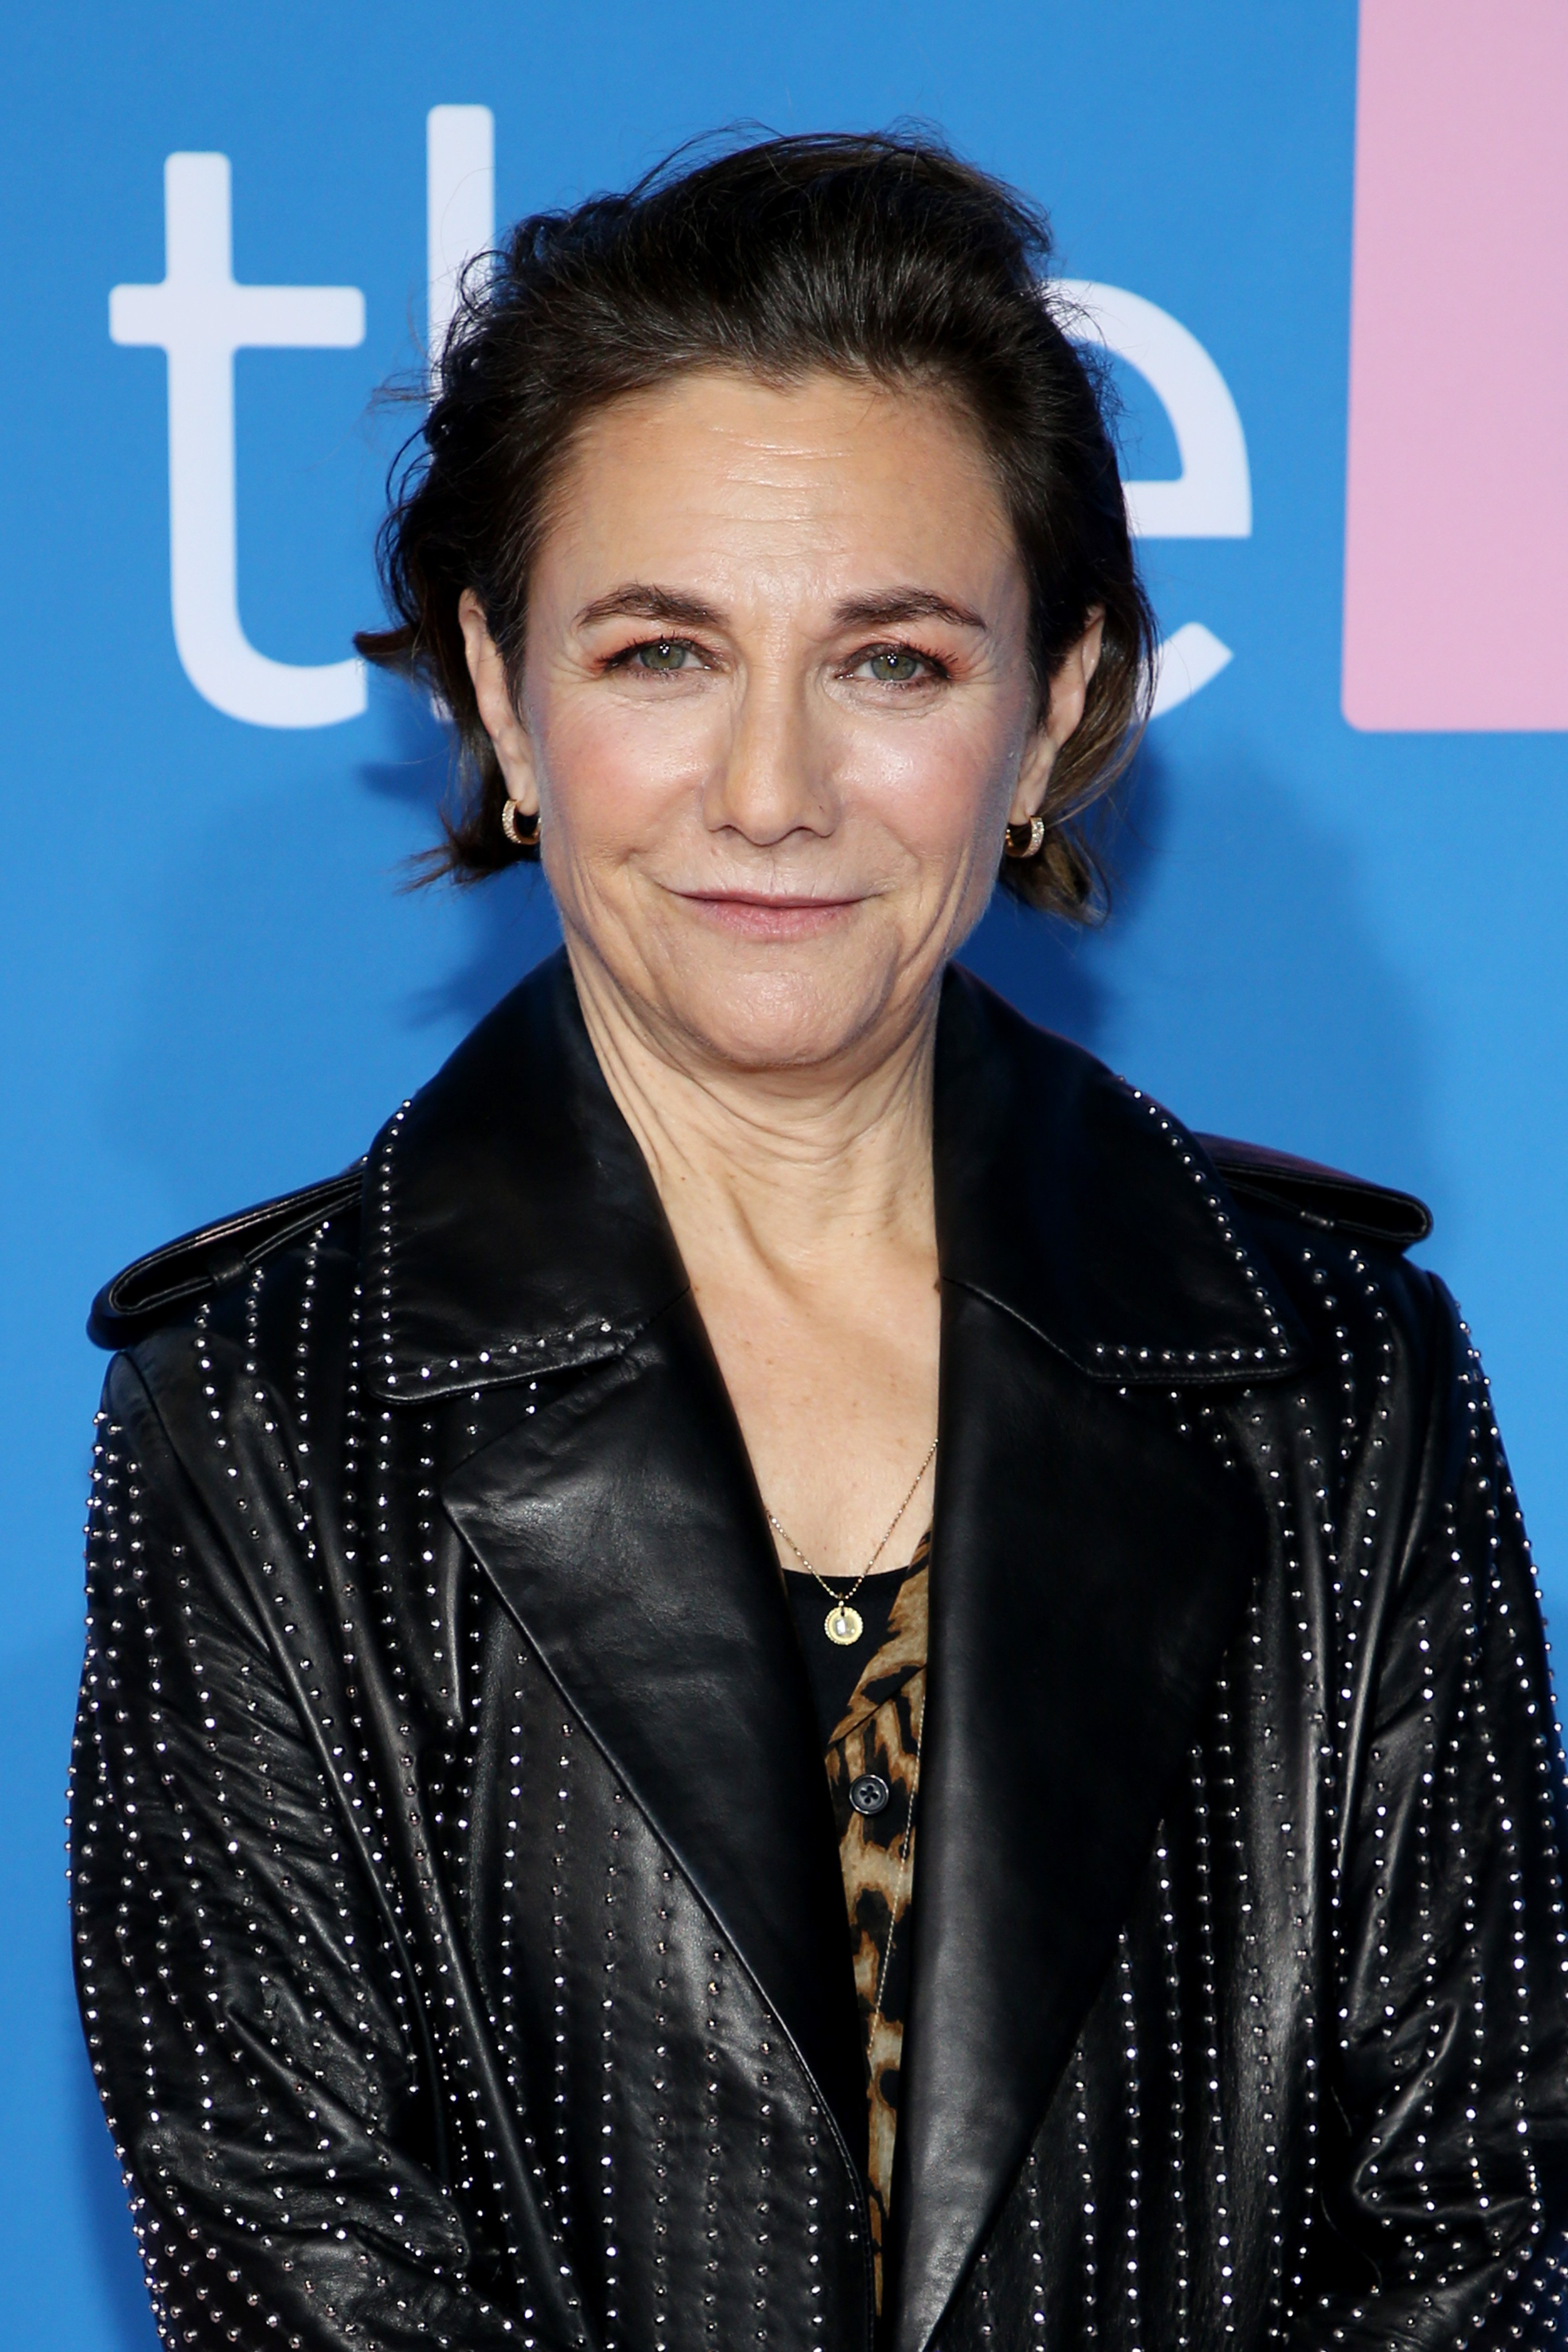 Ilene Chaiken at the premiere of Showtime's "The L Word: Generation Q" at Regal LA Live on December 02, 2019 in California. | Photo: Phillip Faraone/Getty Images